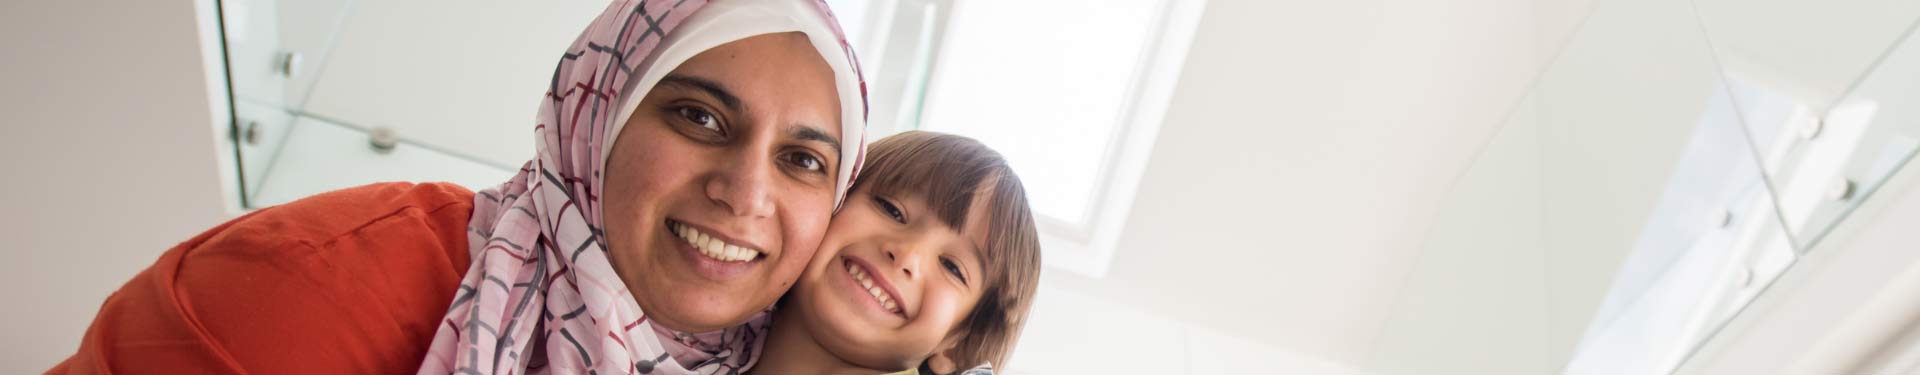 Woman with headscarf and child smiling